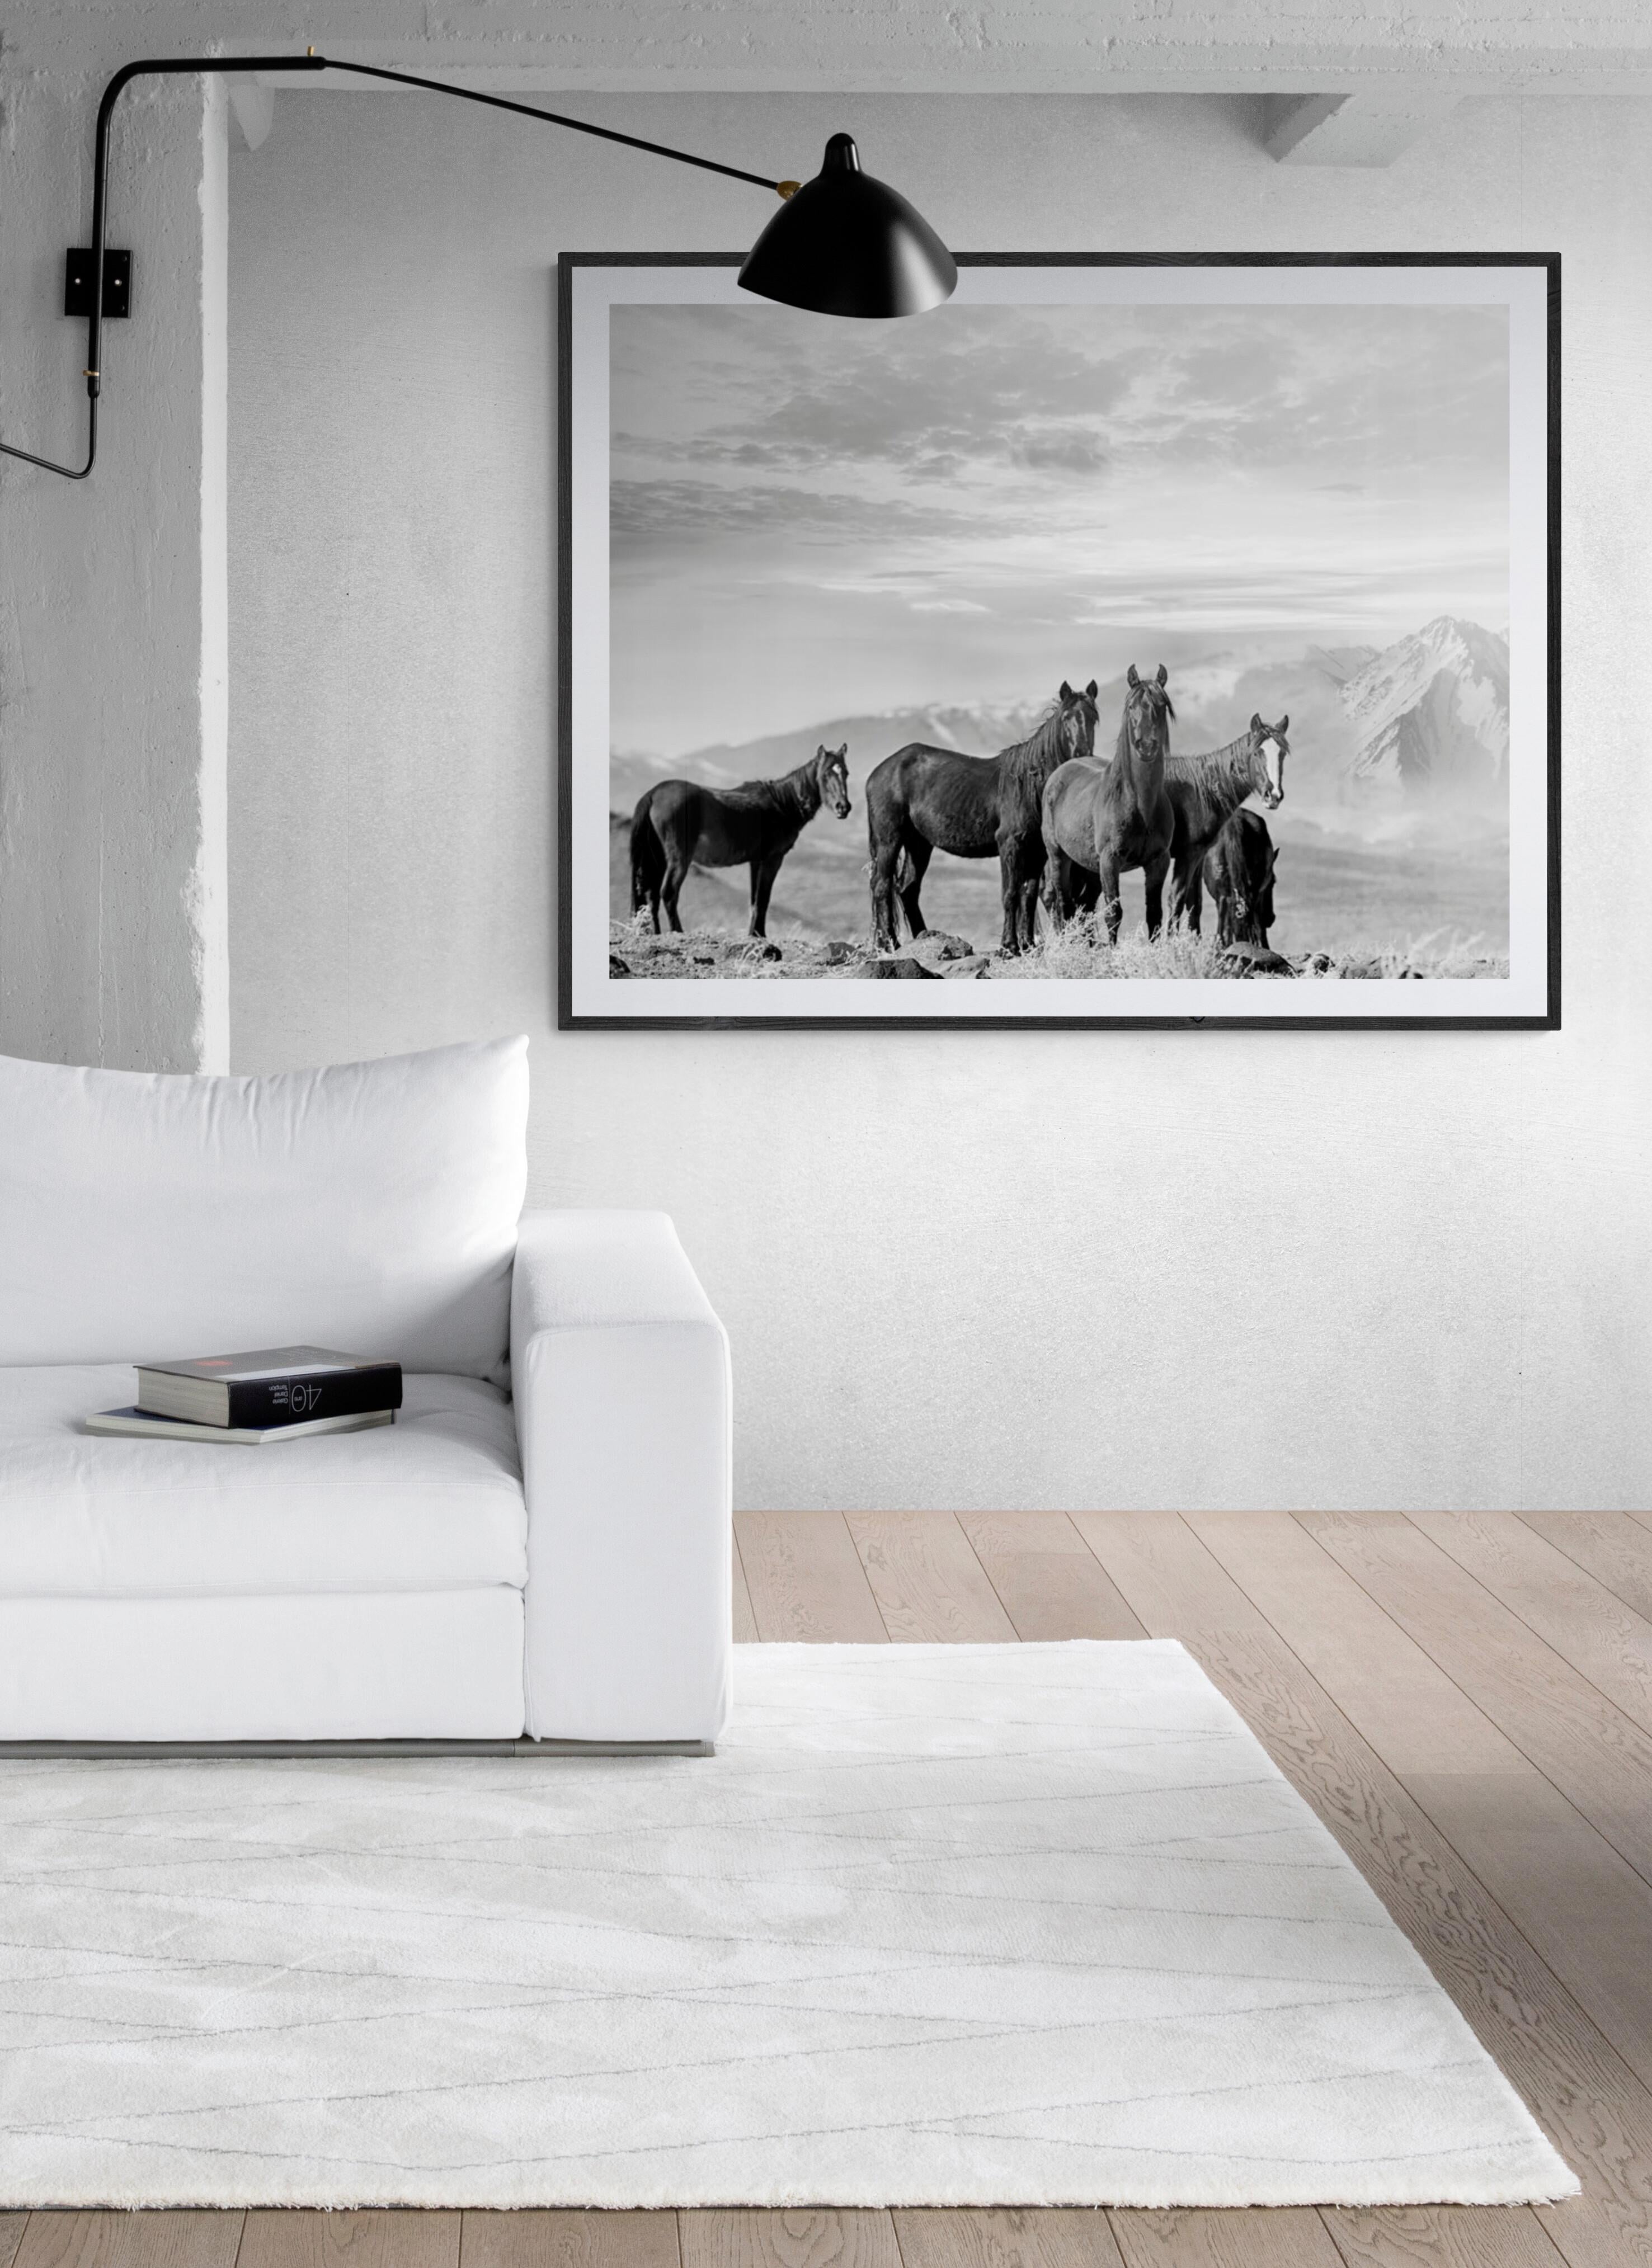 High Sierra Mustangs 36x48 Black and White Photography Wild Horses, Mustangs - Print by Shane Russeck